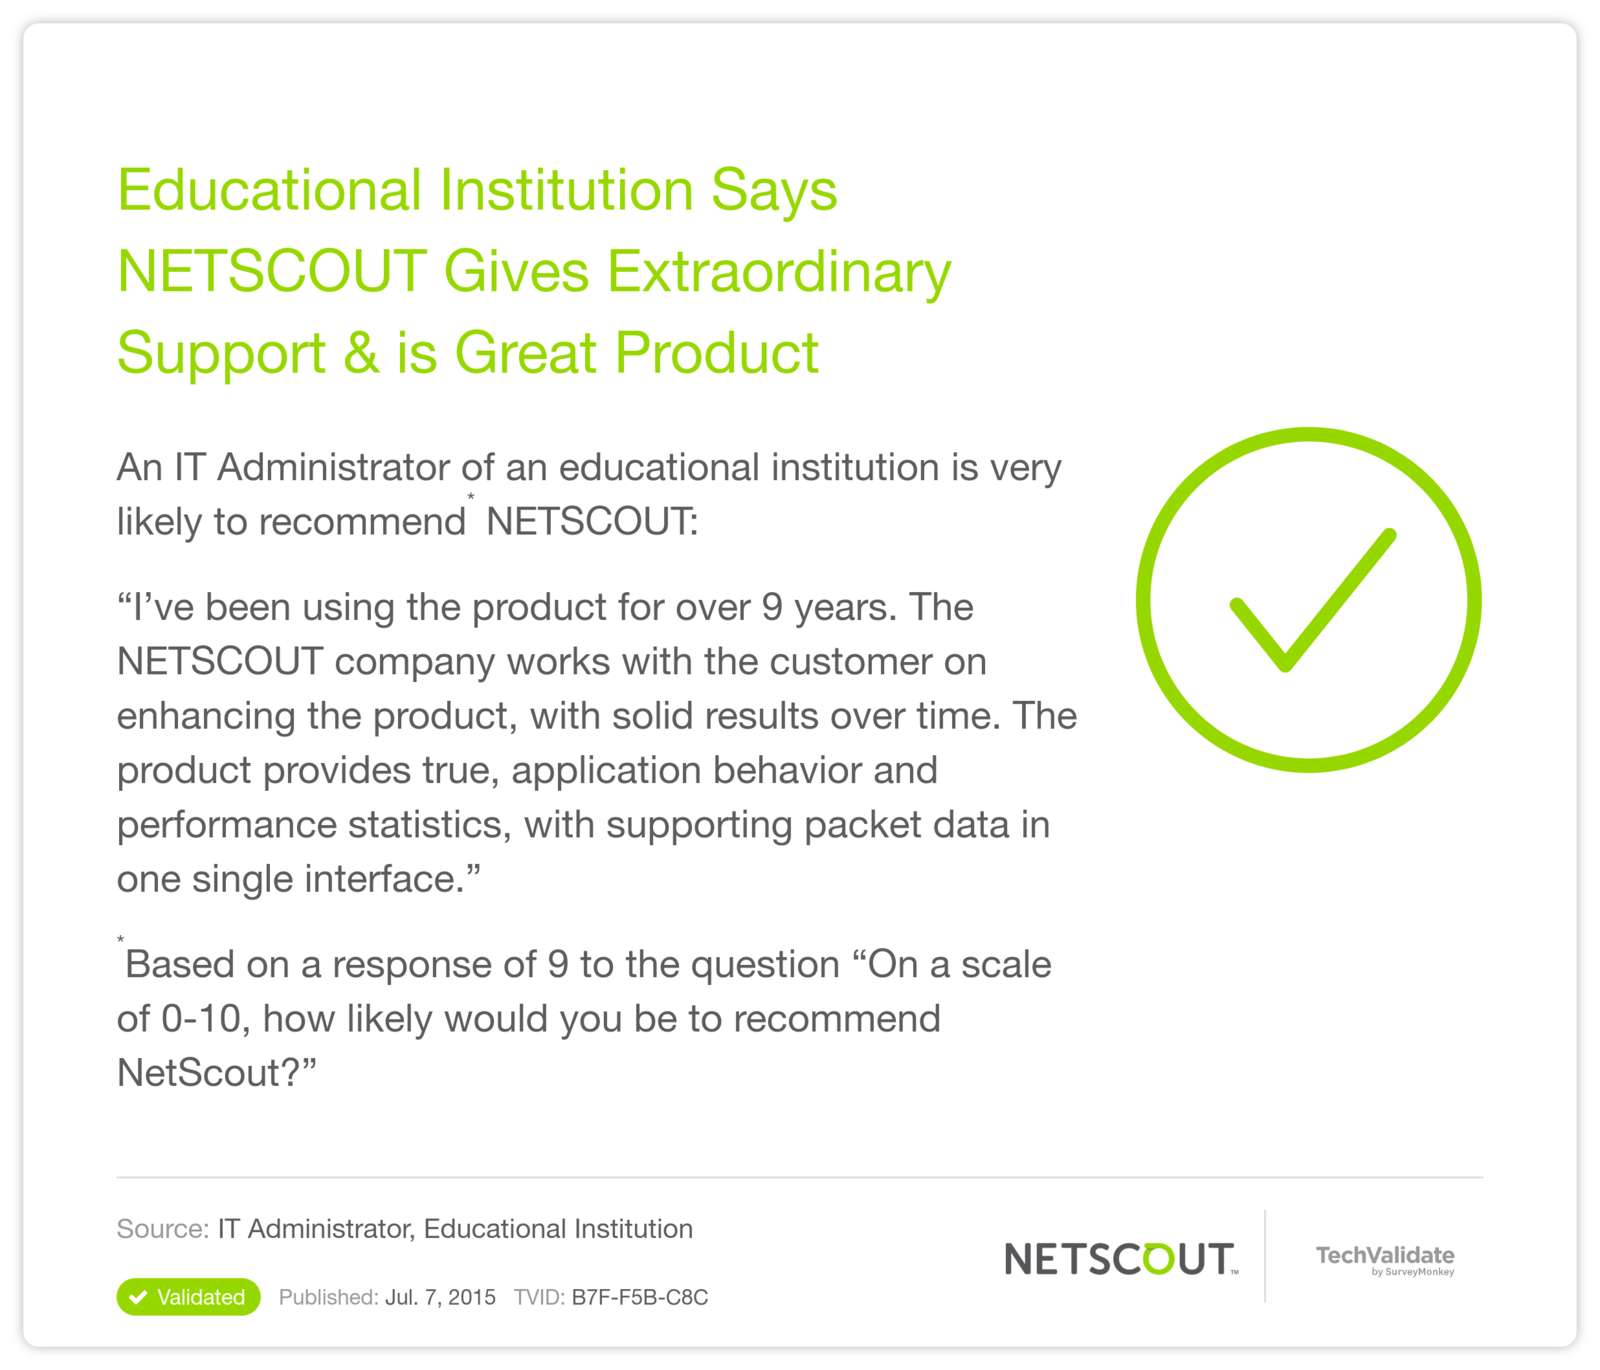 Educational Institution Says NETSCOUT Gives Extraordinary Support & is Great Product